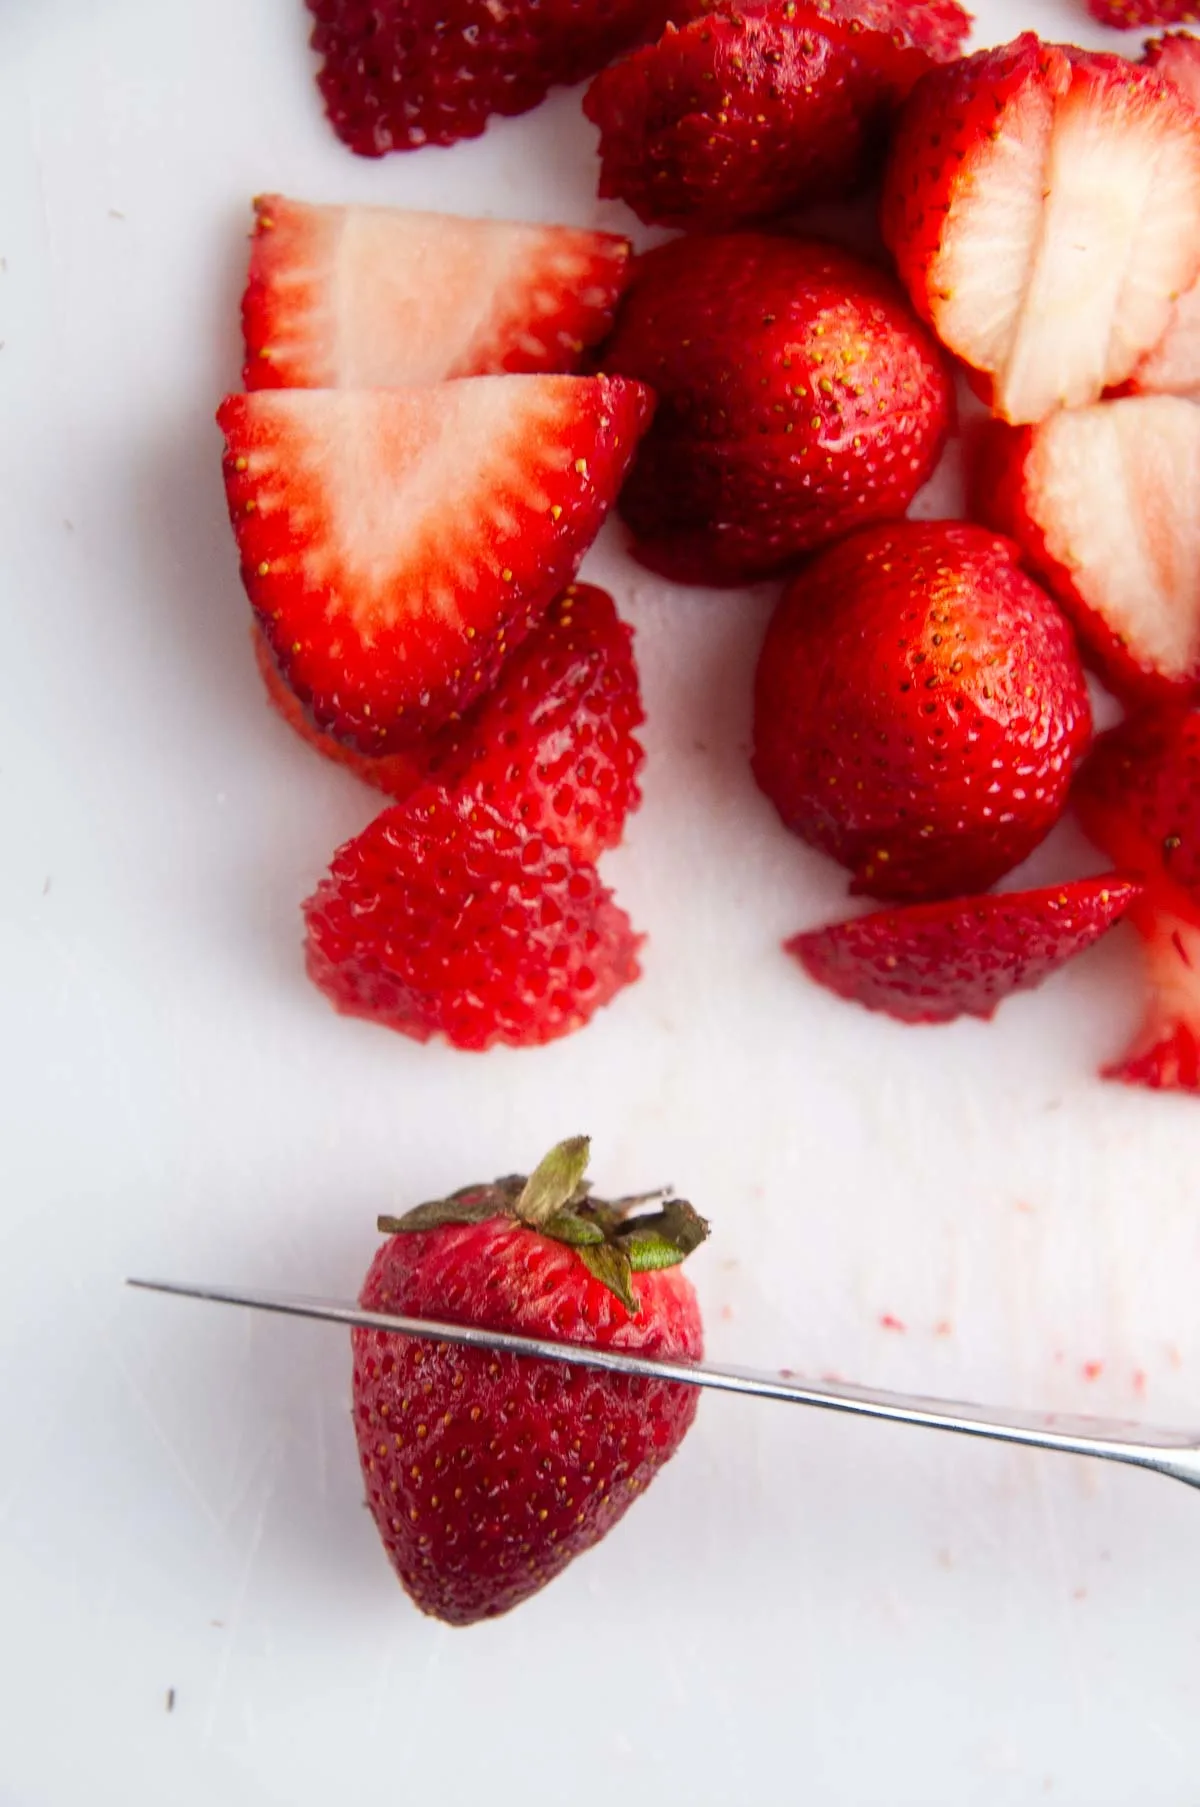 Cut the tops off of the strawberries and slice them